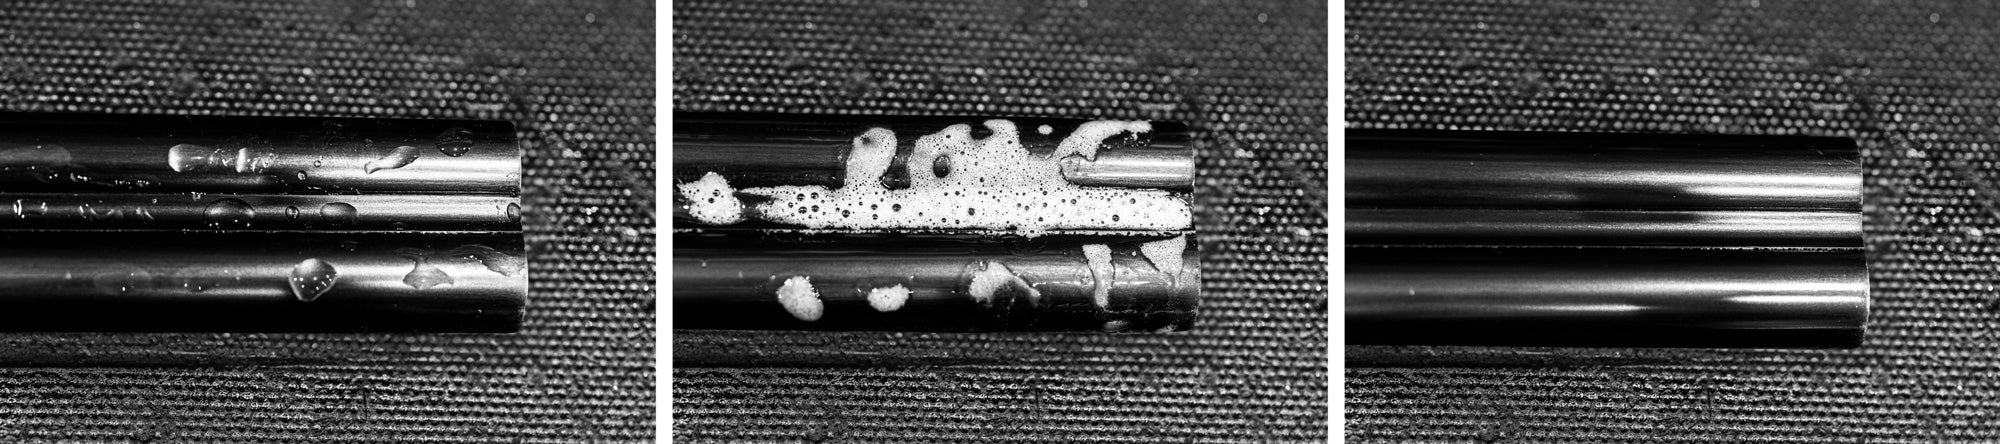 3 images - Moisture on a gun barrel - Pro Ferrum encapsulating moisture on a gun barrel- Gun barrel after the encapsulated moisture has been wiped off with a cloth